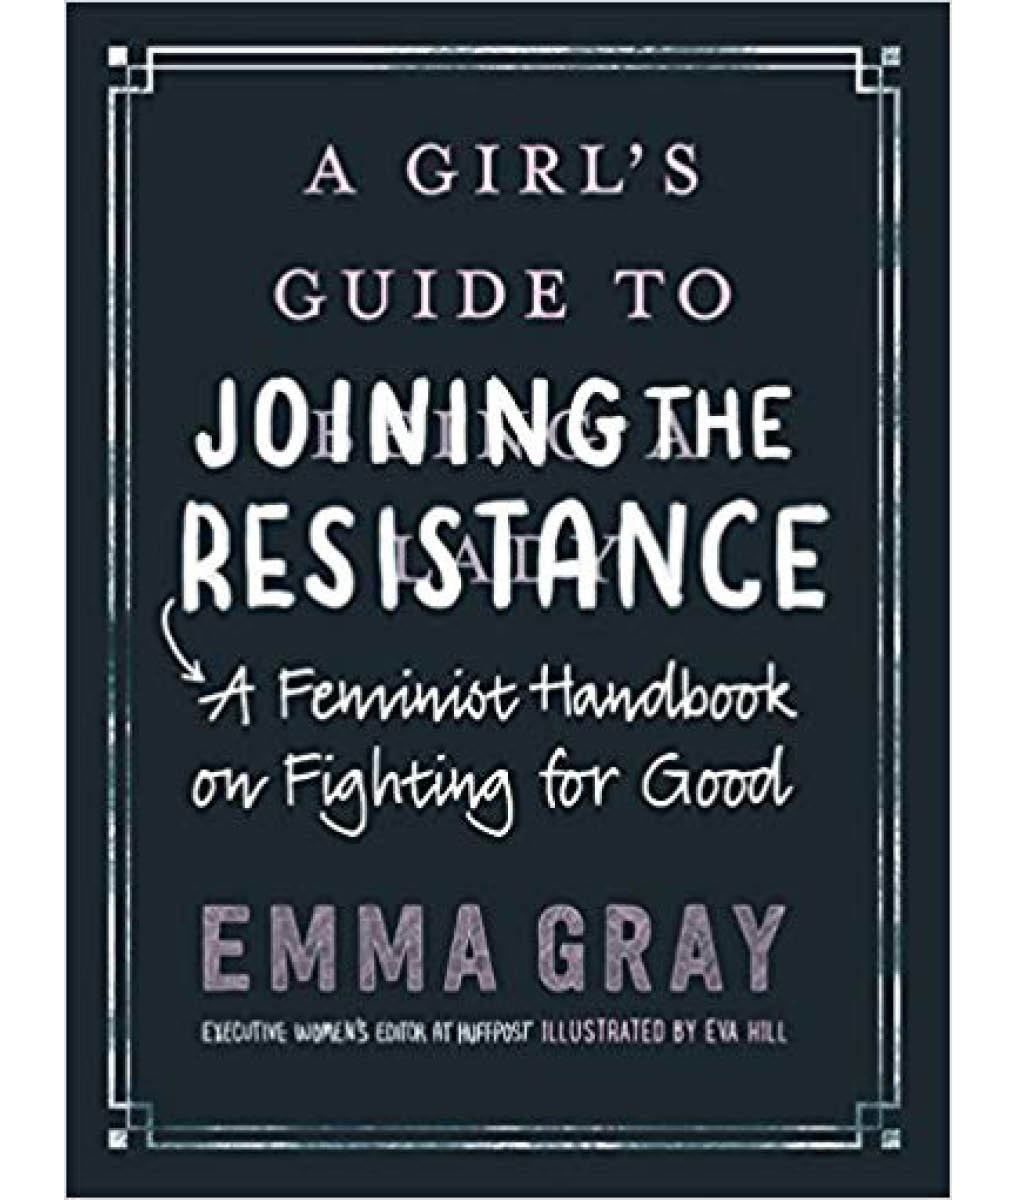 A Girl&#39;s Guide to Joining the Resistance : A Handbook on Feminism and Fighting for Good Emma Gray